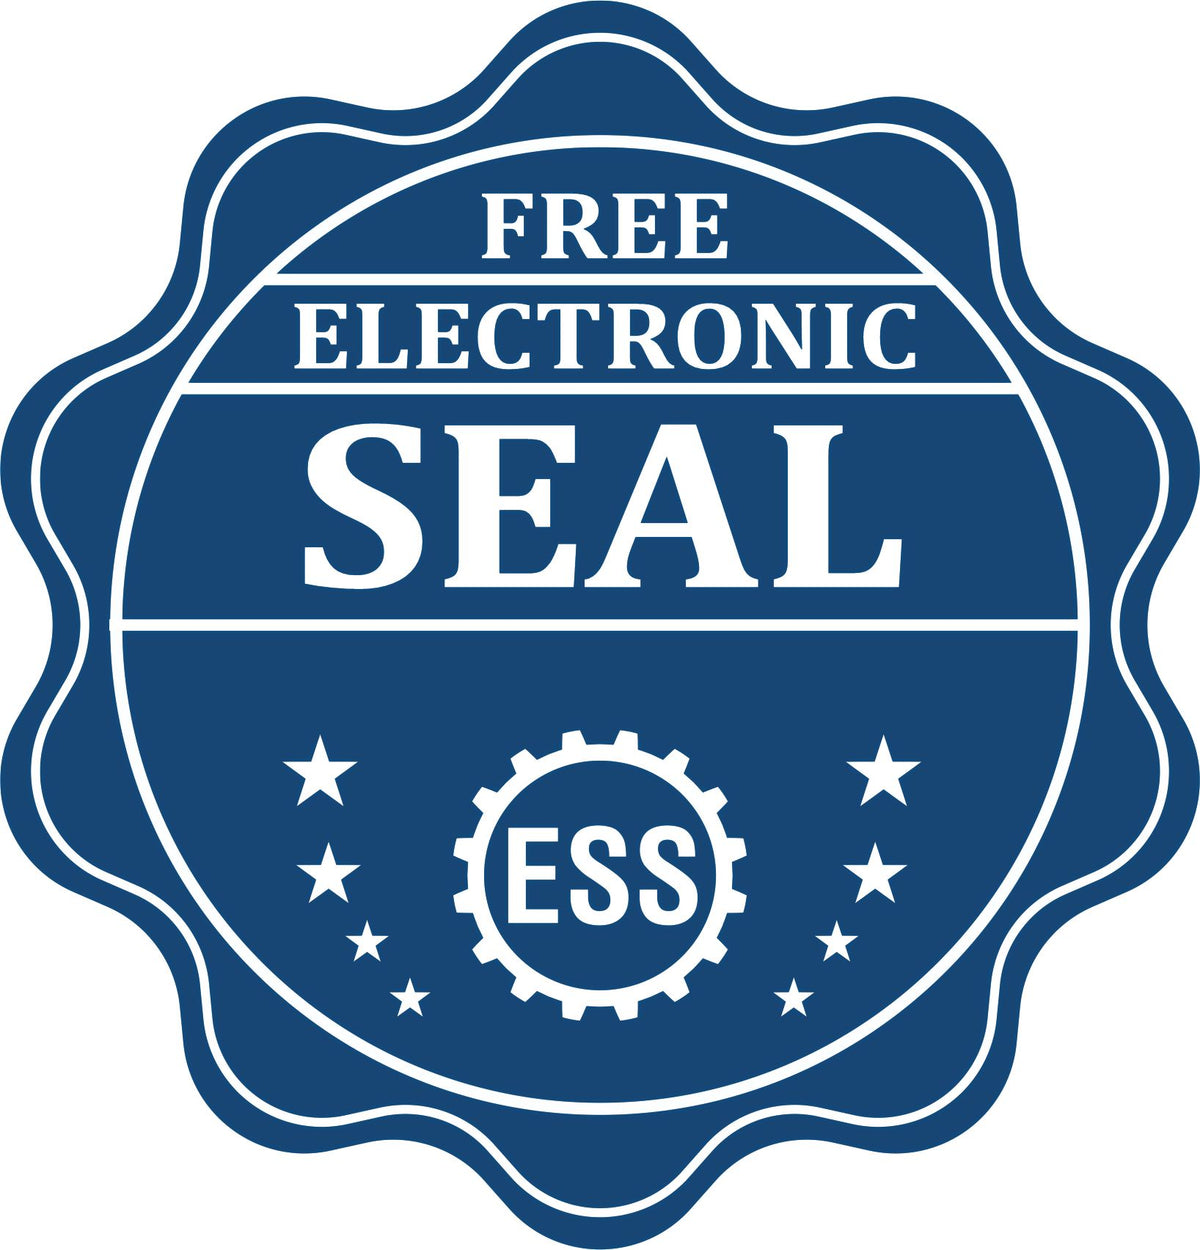 A badge showing a free electronic seal for the Gift Ohio Engineer Seal with stars and the ESS gear on the emblem.